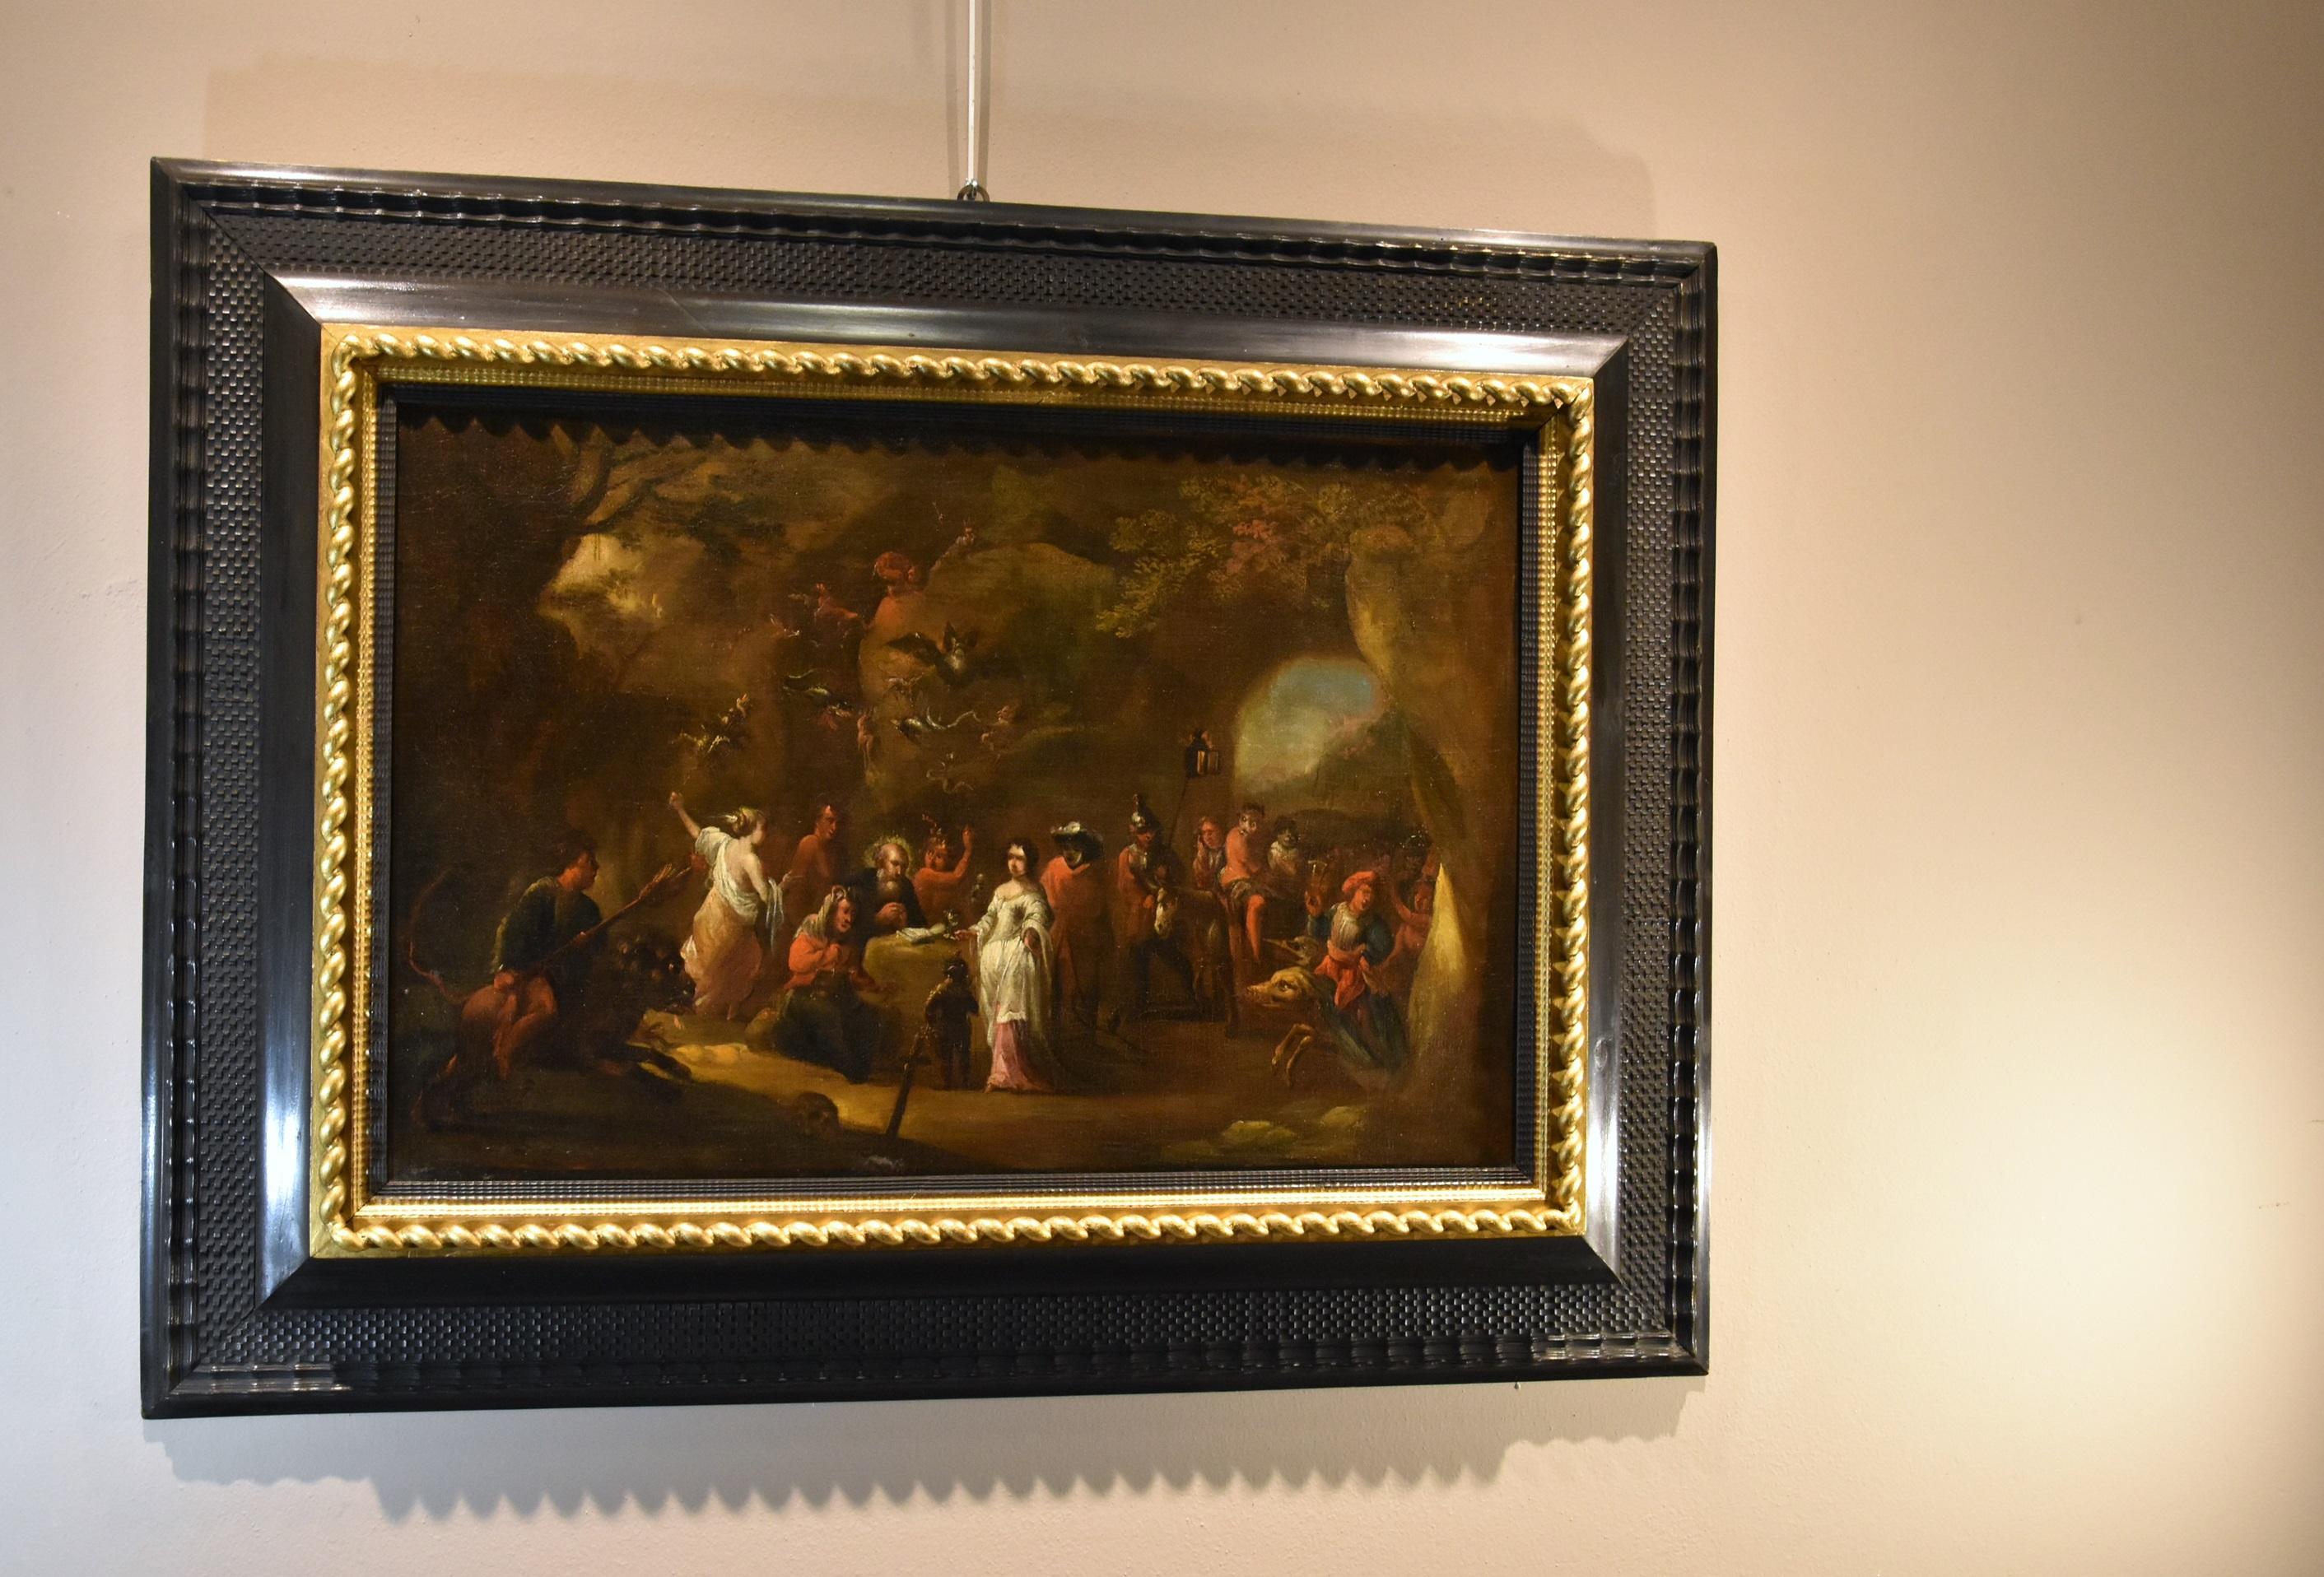 Temptations St. Anthony Teniers II Paint 17th Century Oil on canvas Flemish  For Sale 10